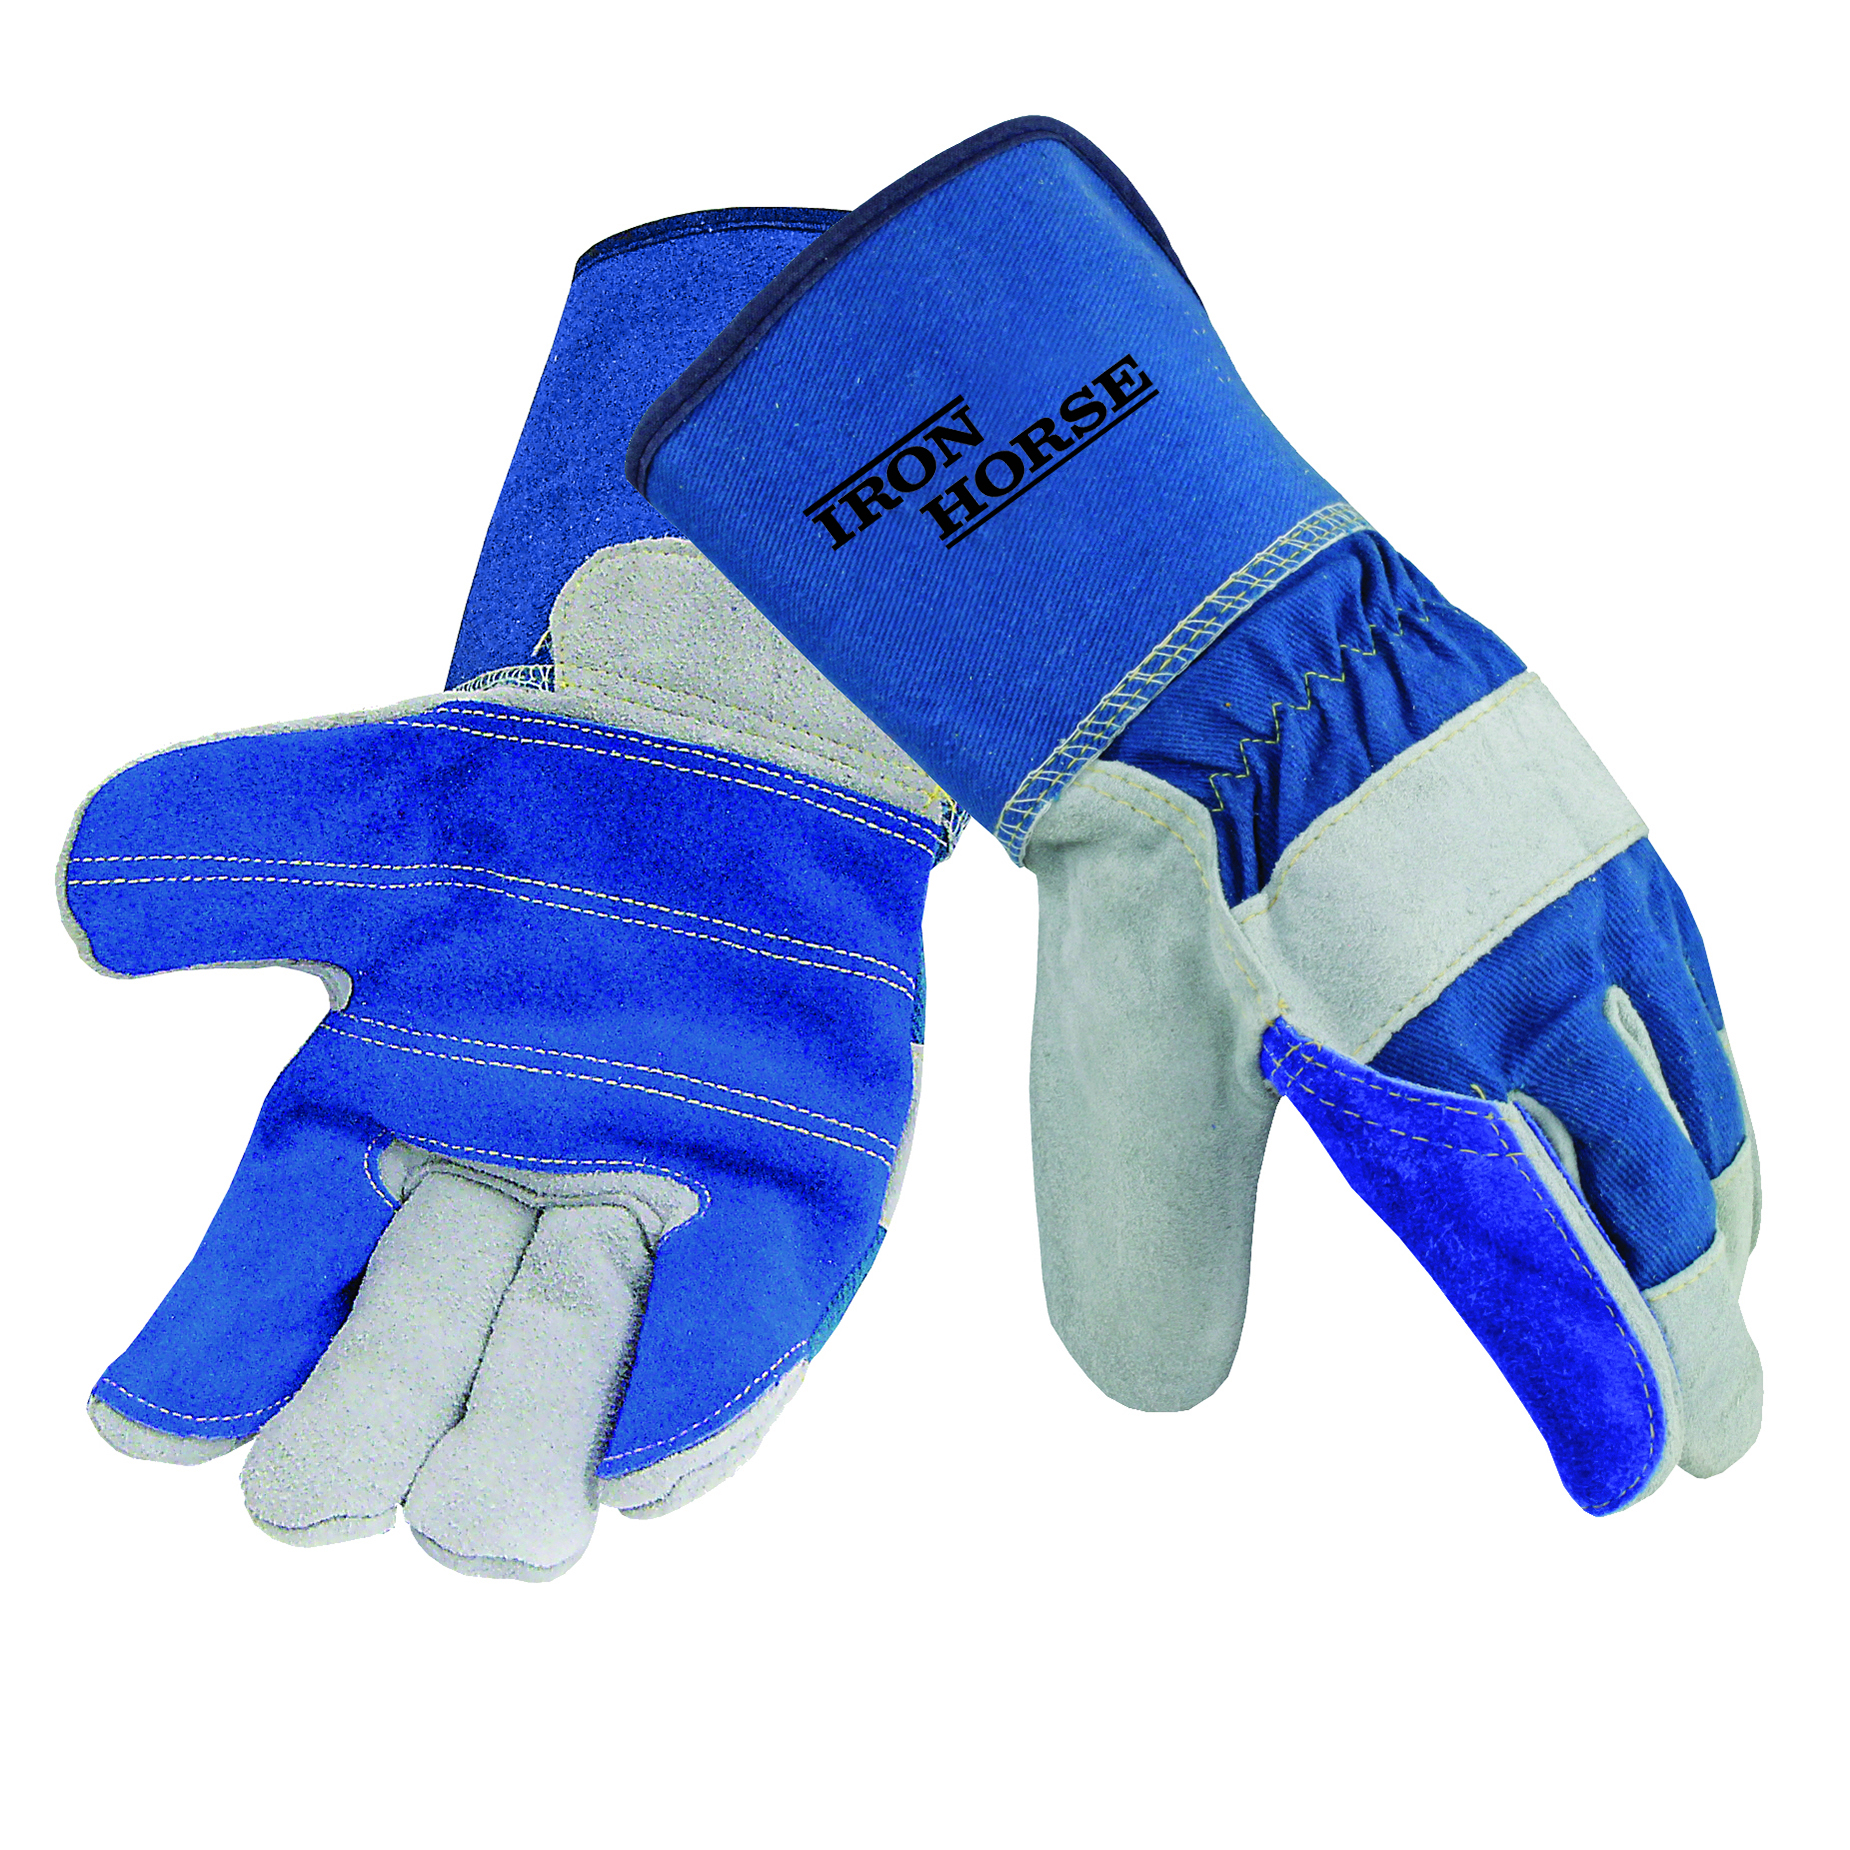 Iron Horse Double Leather Palm Gloves, Gauntlet Cuff, Sewn with Cut Resistant Thread